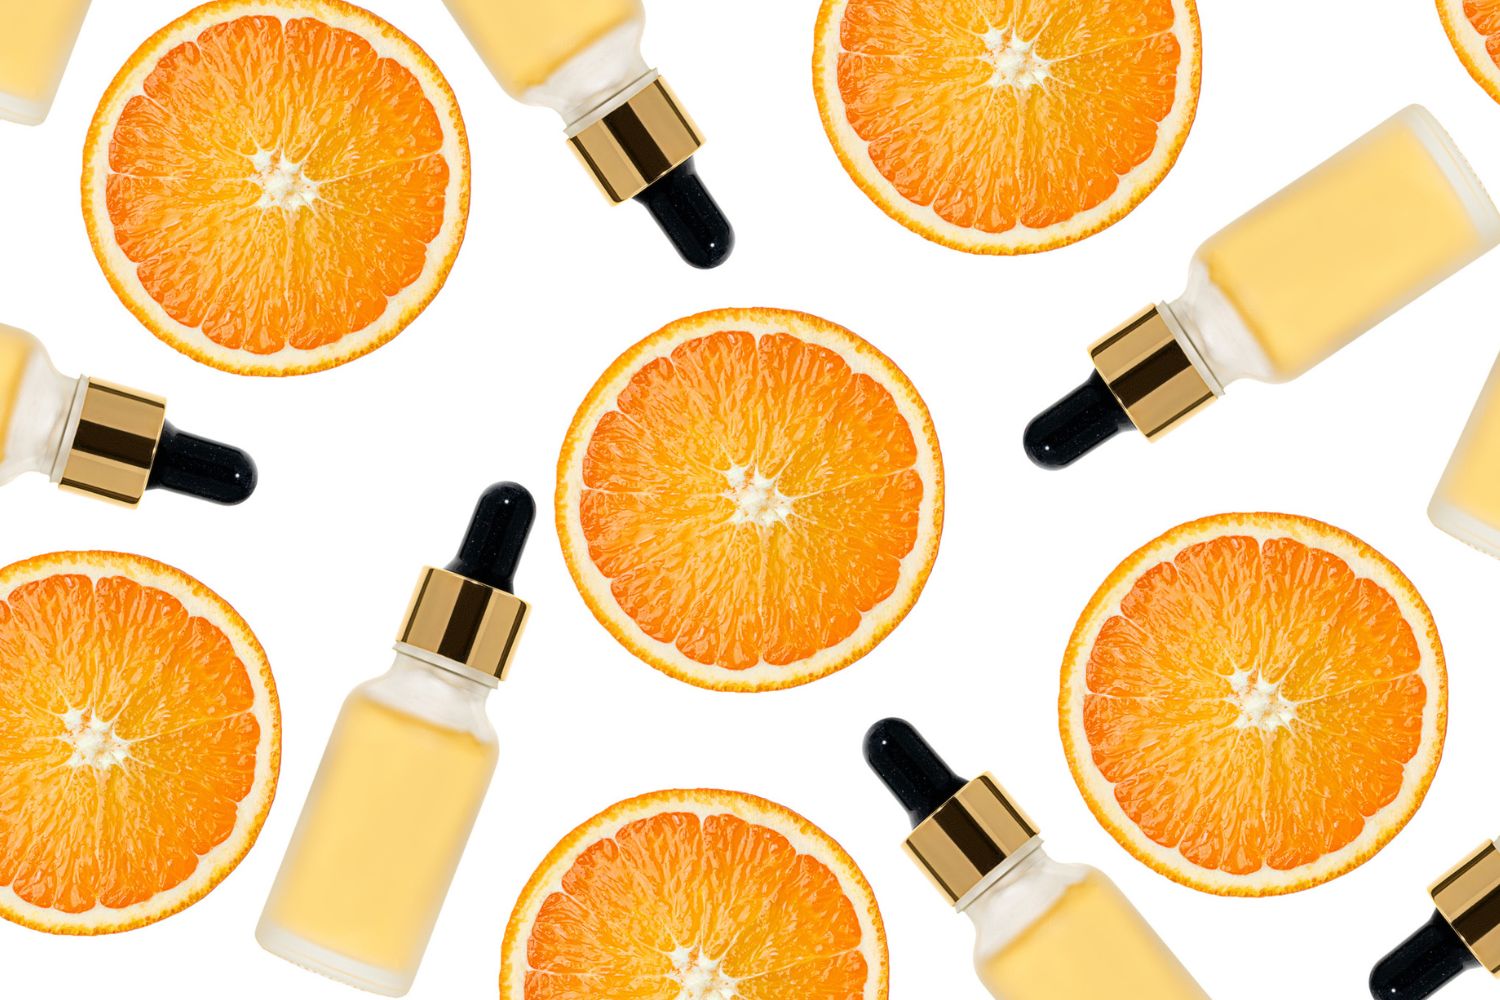 Vitamin C can do wonders for your skin's health and vitality.